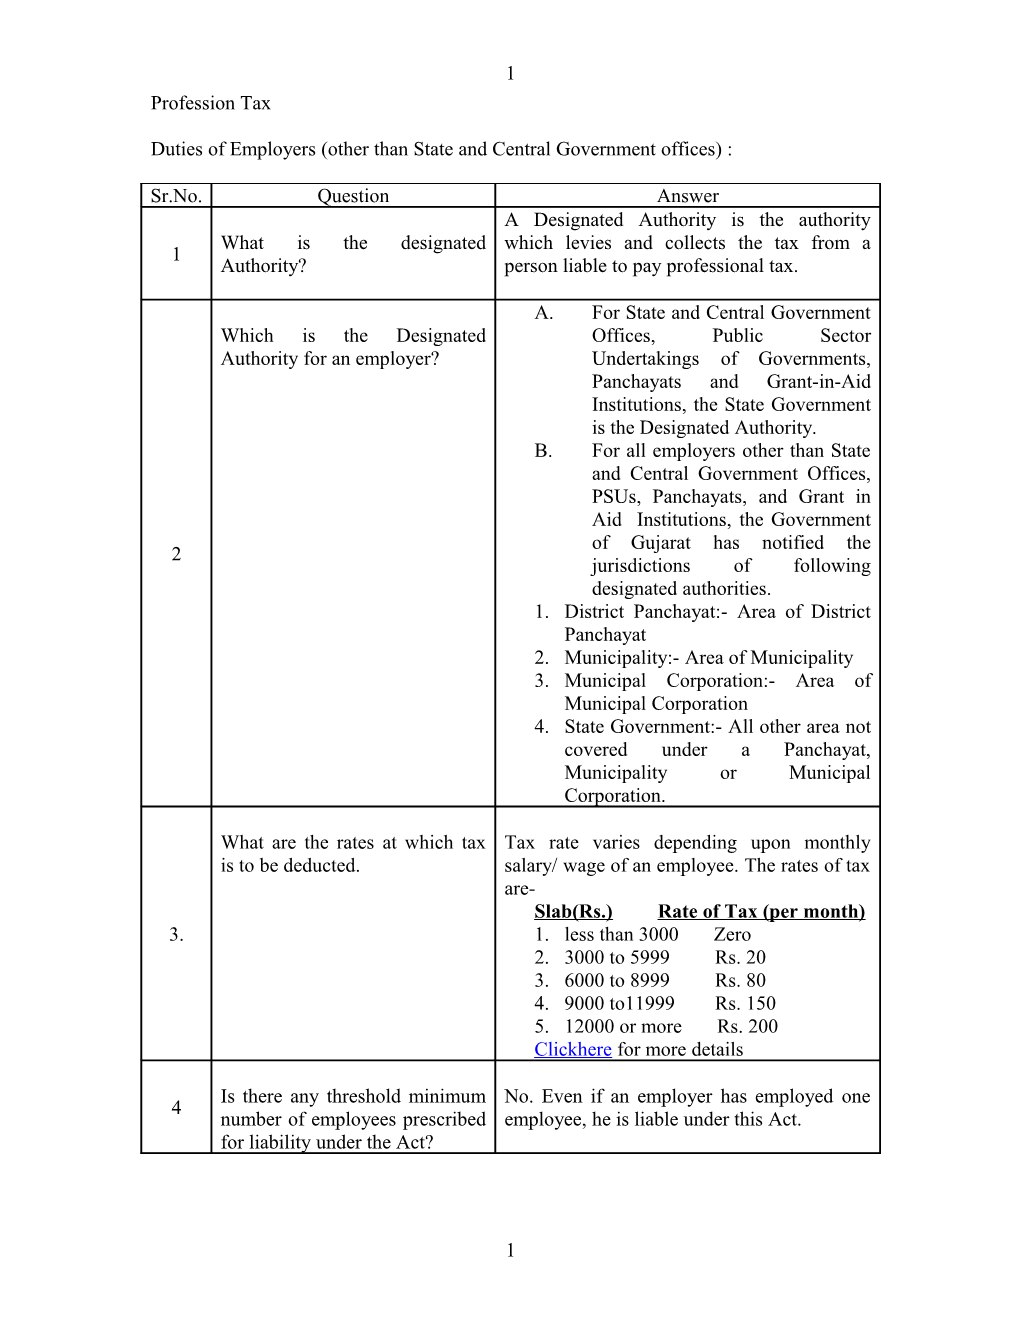 Duties of Employers (Other Than State and Central Government Offices)